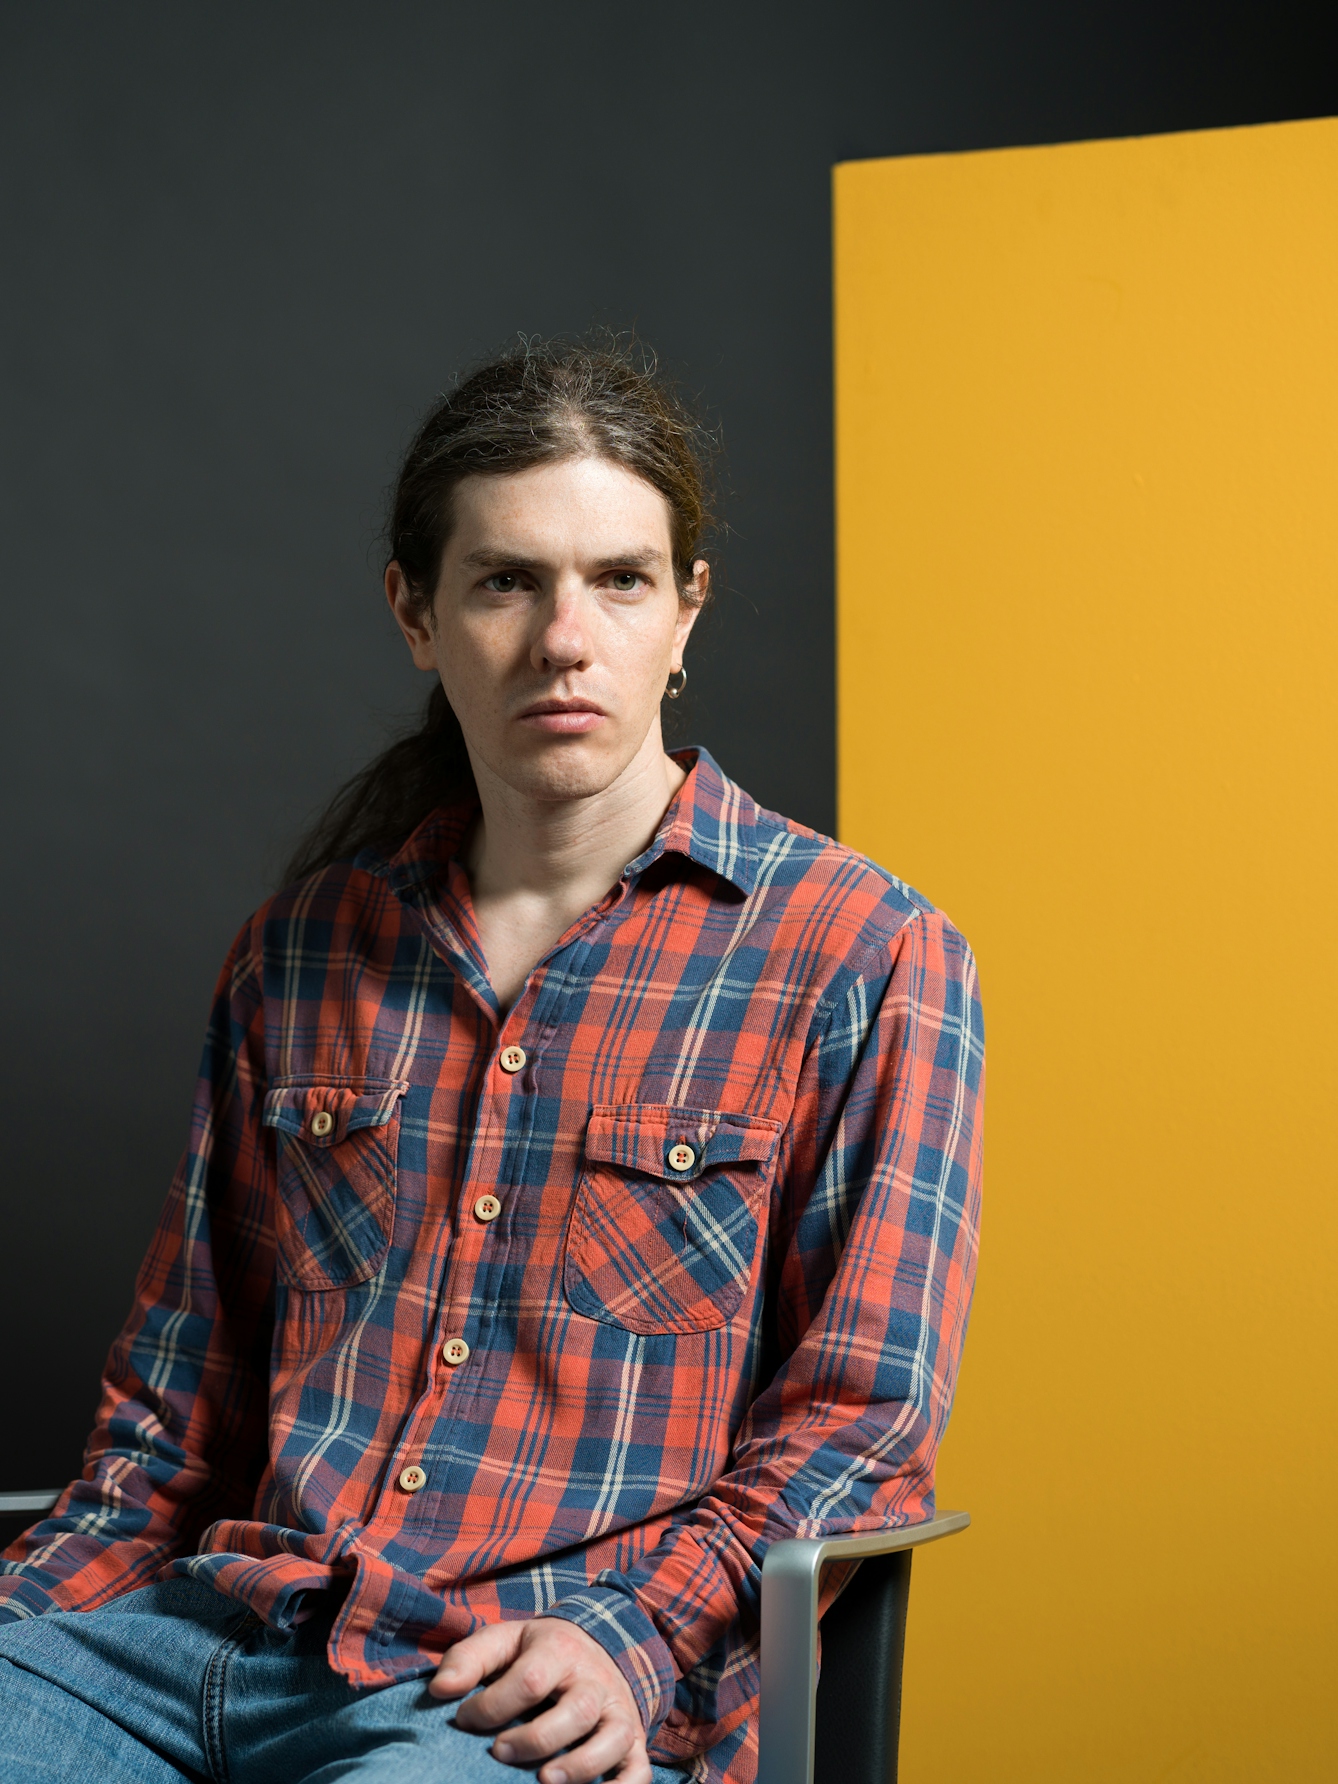 Colour photograph half-length portrait of Sam Castell-Ward, who is seated in a chair. Sam is white and has a serious expression. Sam has brown hair swept back into a ponytail and a single hoop earring in their left ear. Sam wears a red and blue plaid button-down shirt and jeans. 